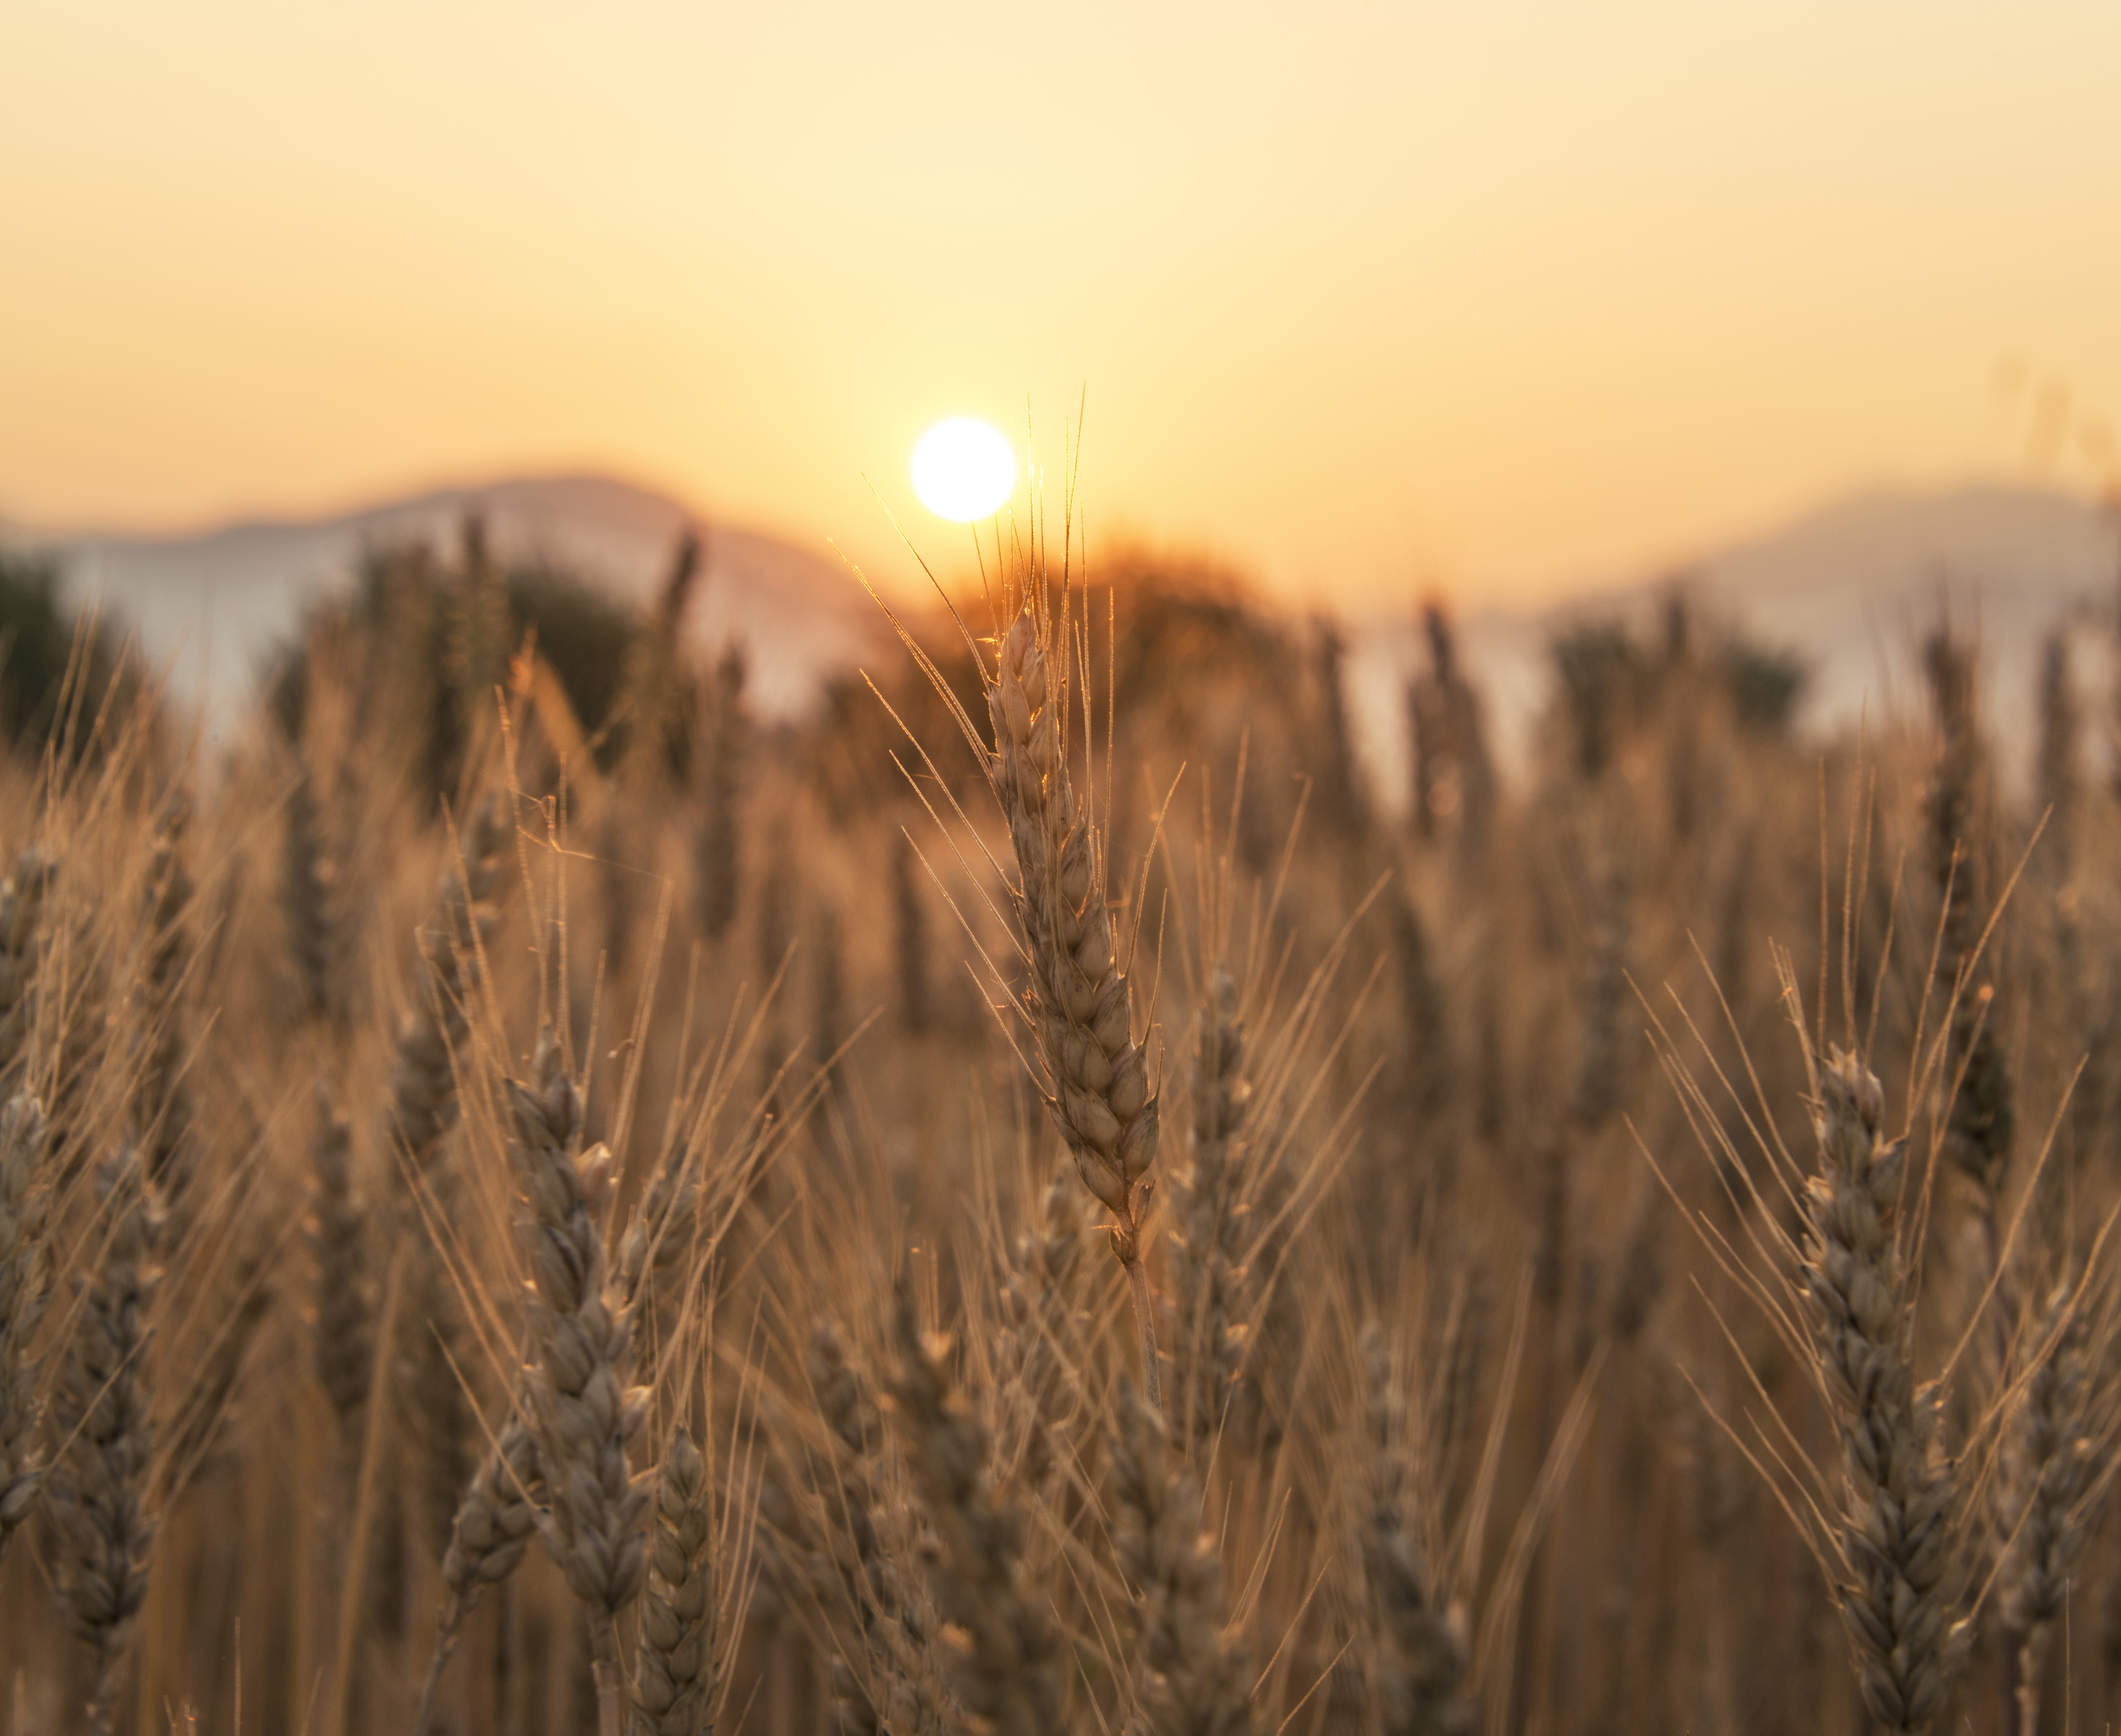 File:Sunset-over-the-wheat-field-featured.jpg - Wikimedia Commons